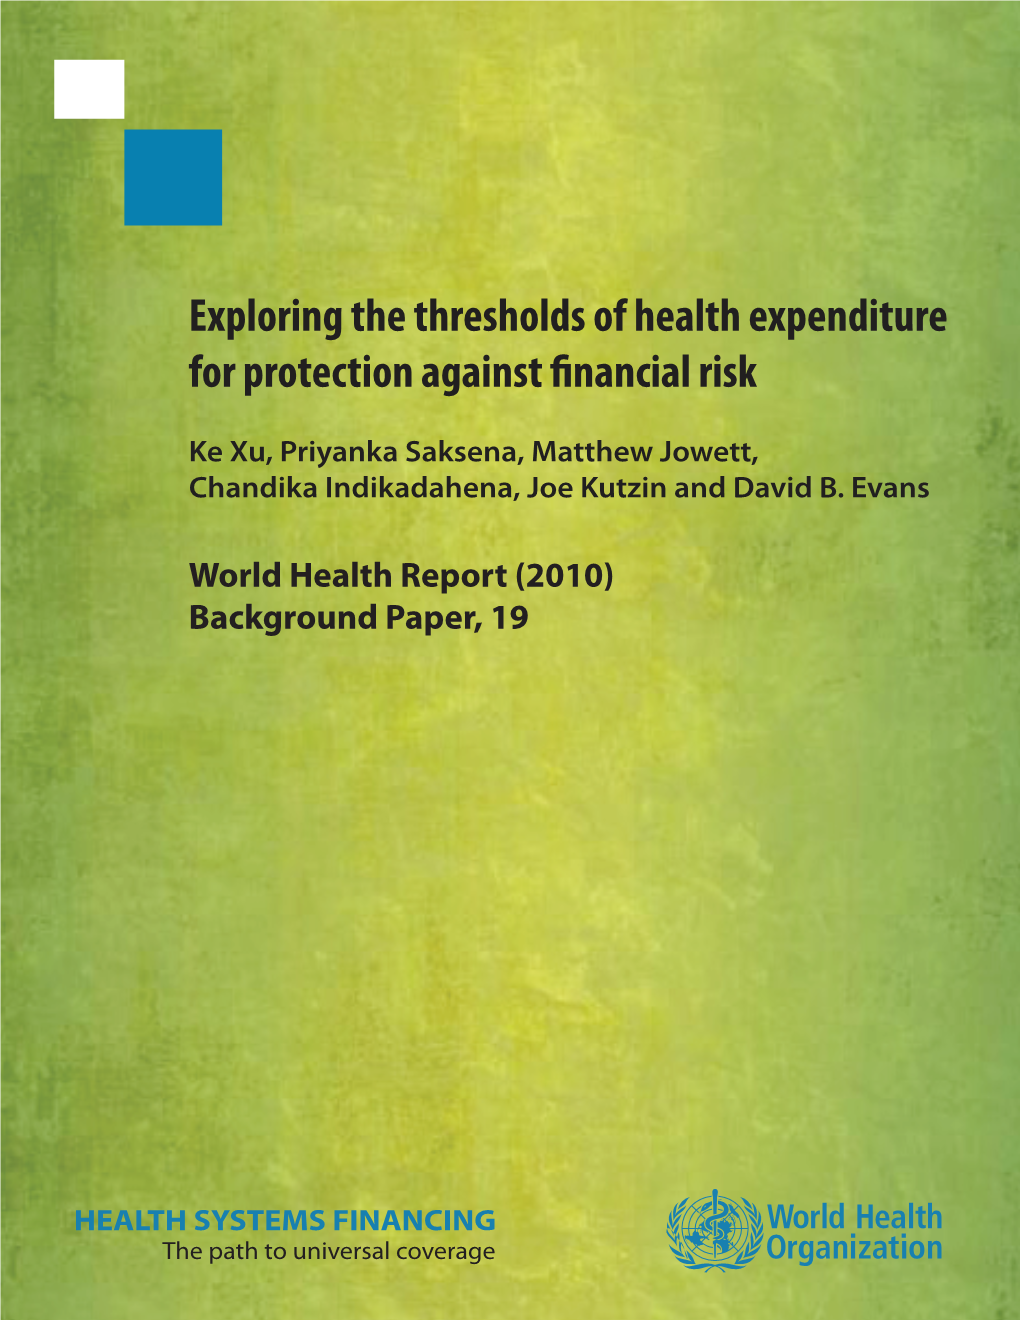 Exploring the Thresholds of Health Expenditure for Protection Against Nancial Risk